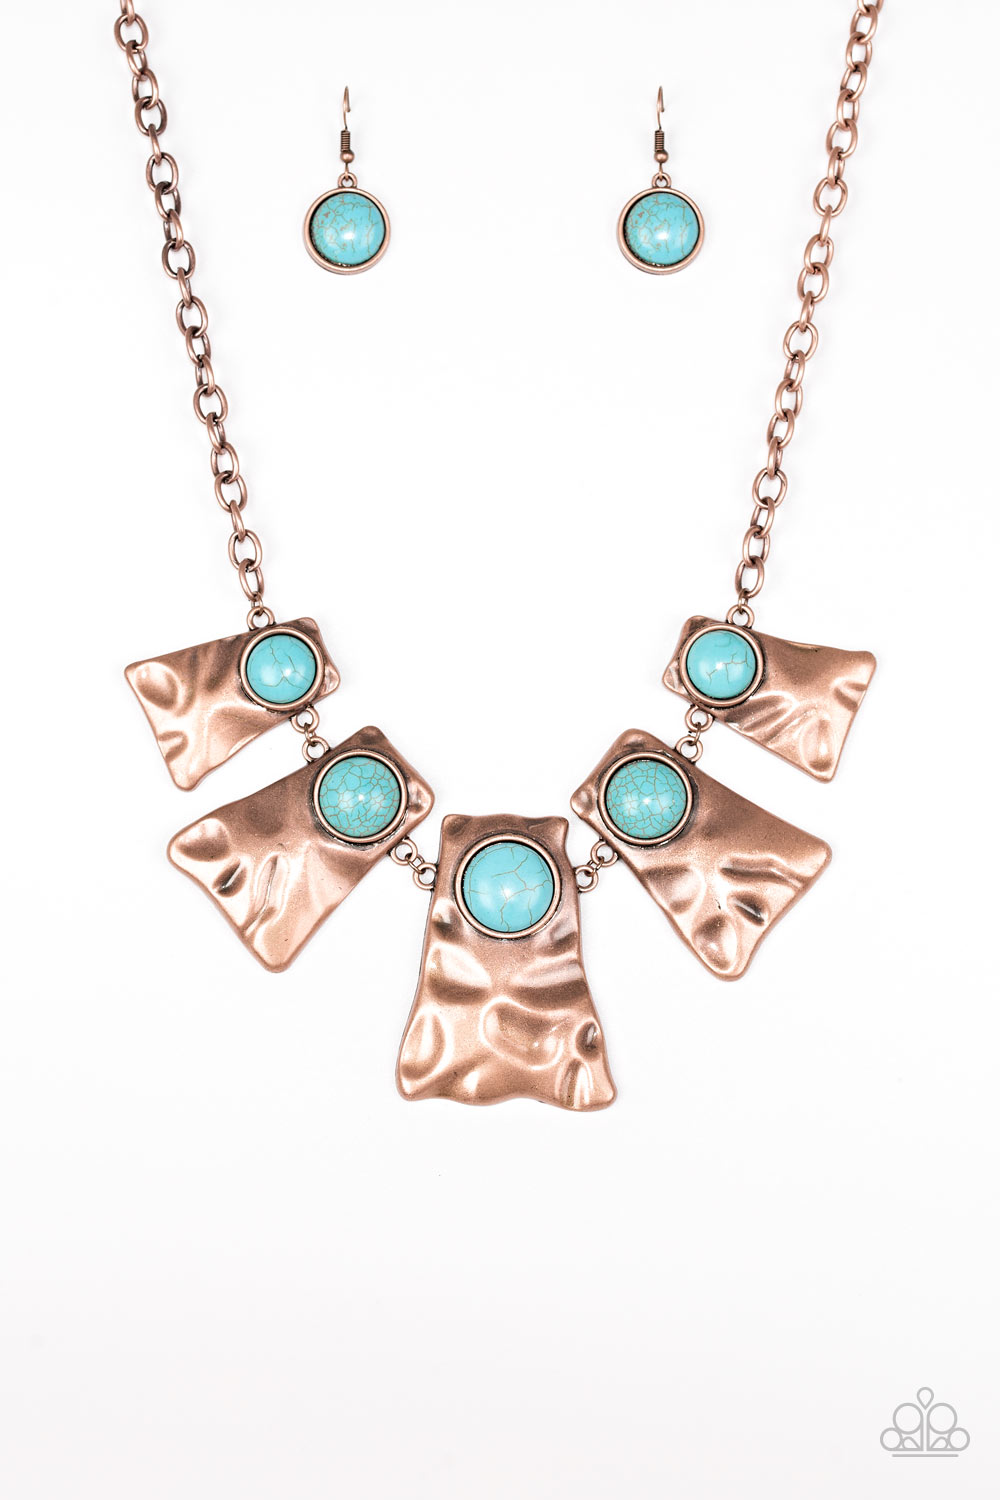 Cougar - Copper/Turquoise necklace